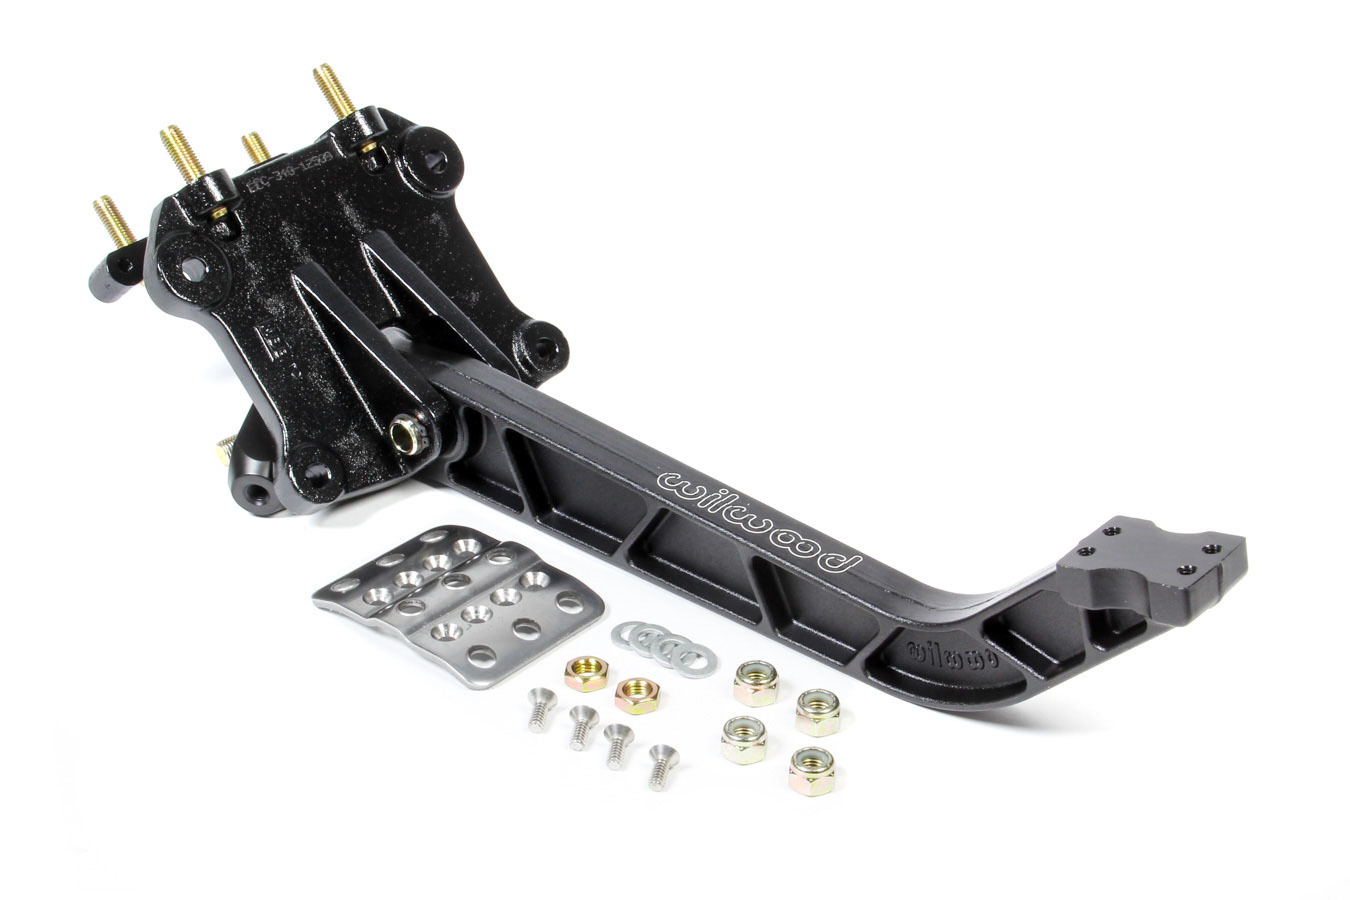 Wilwood 340-12509 Pedal Assembly, Brake, 6.25 to 1 Ratio, 11.710 in Long, Reverse Swing Mount, Aluminum, Black Paint, Kit